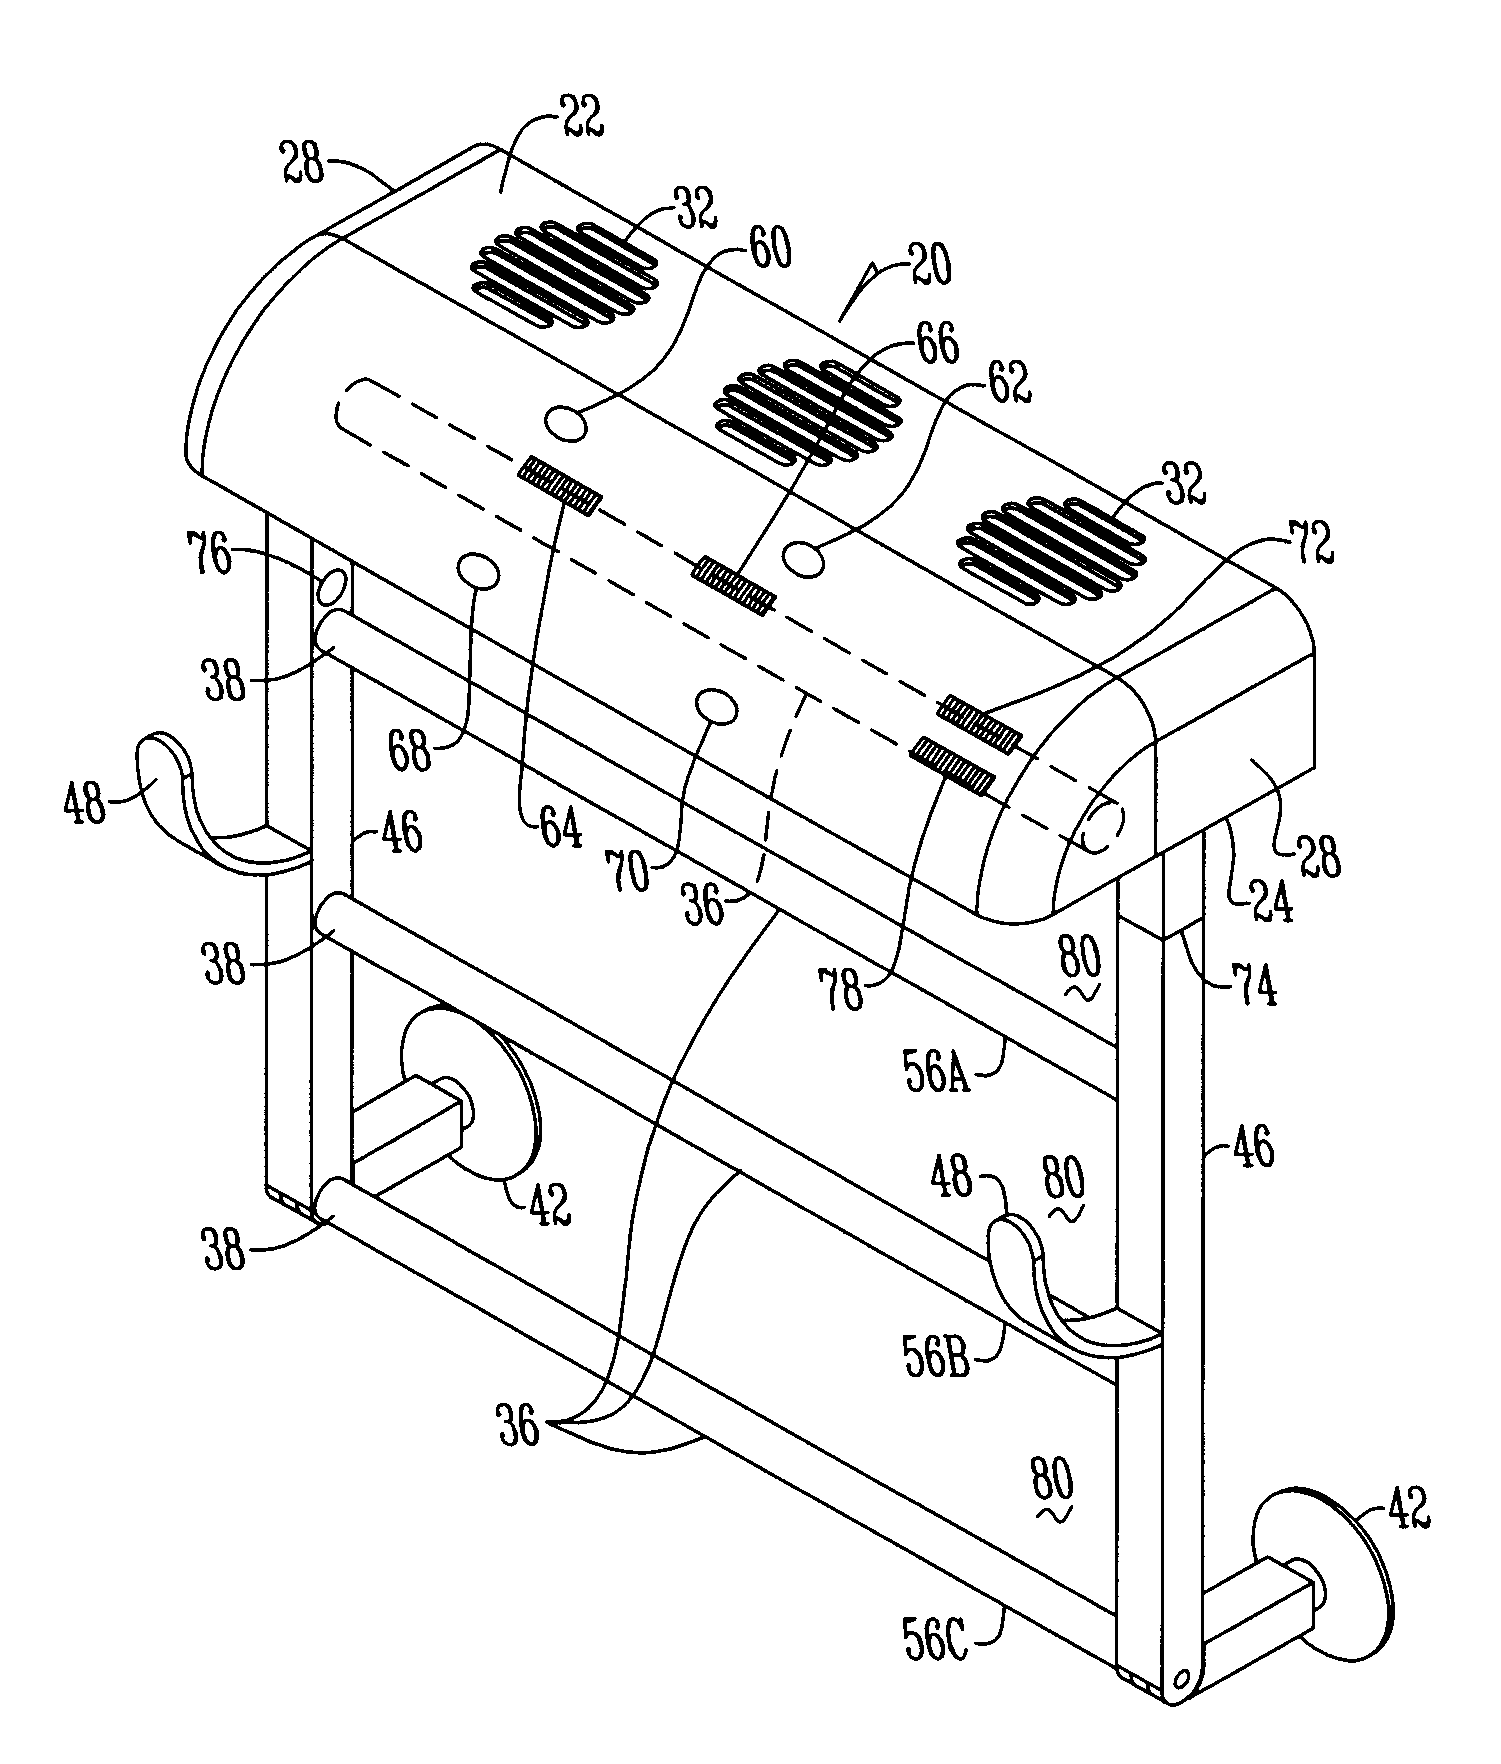 Holding assembly and method of use